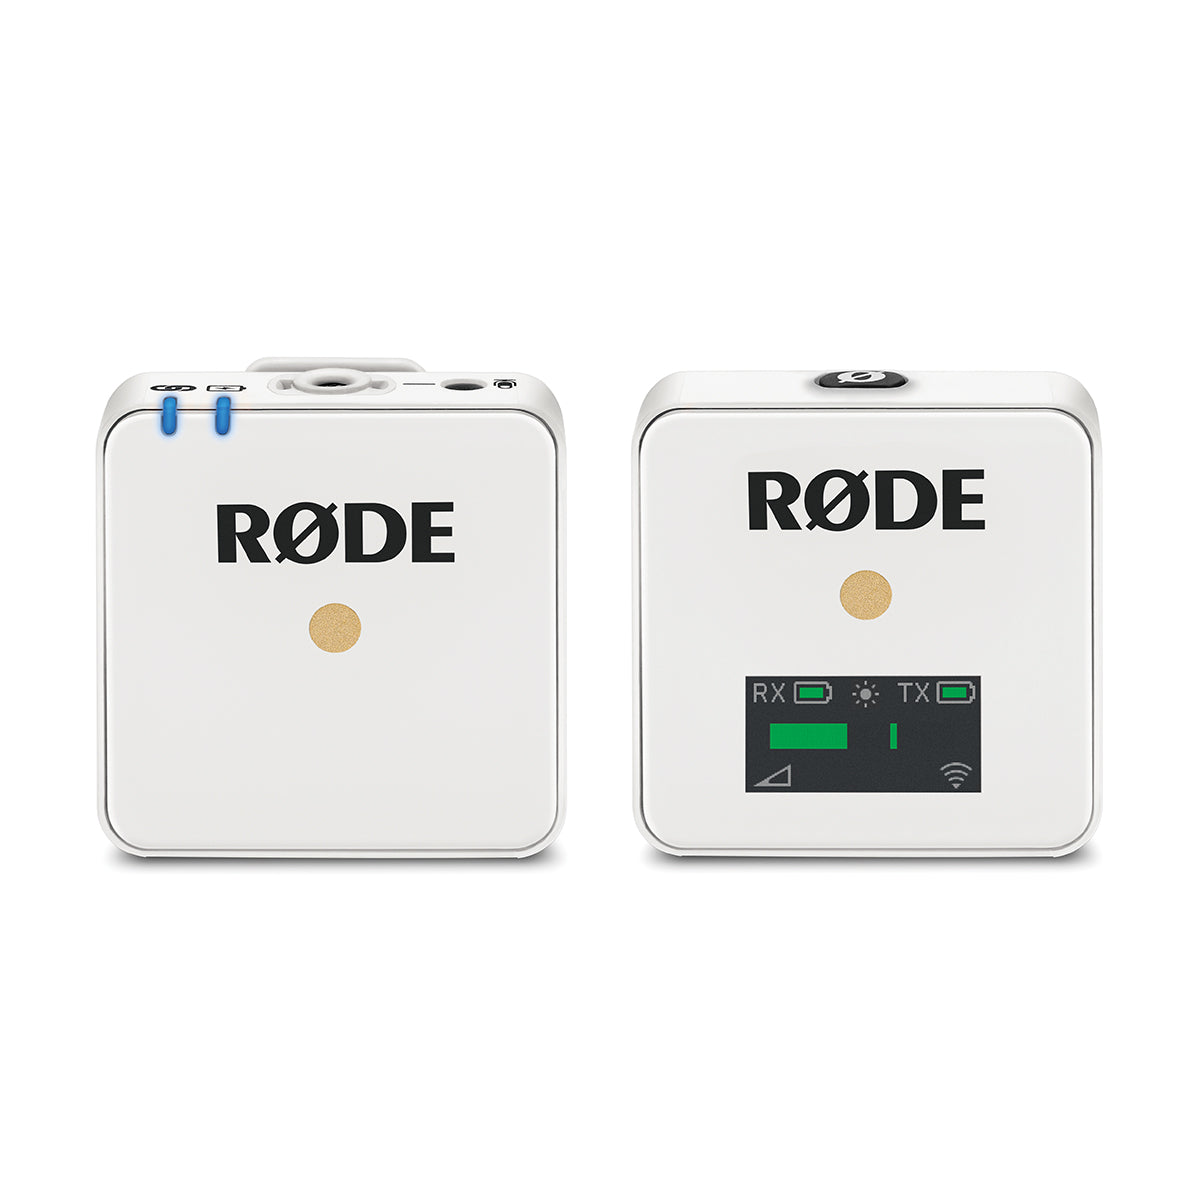 RODE Wireless GO Compact Wireless Microphone System (2.4 GHz) White